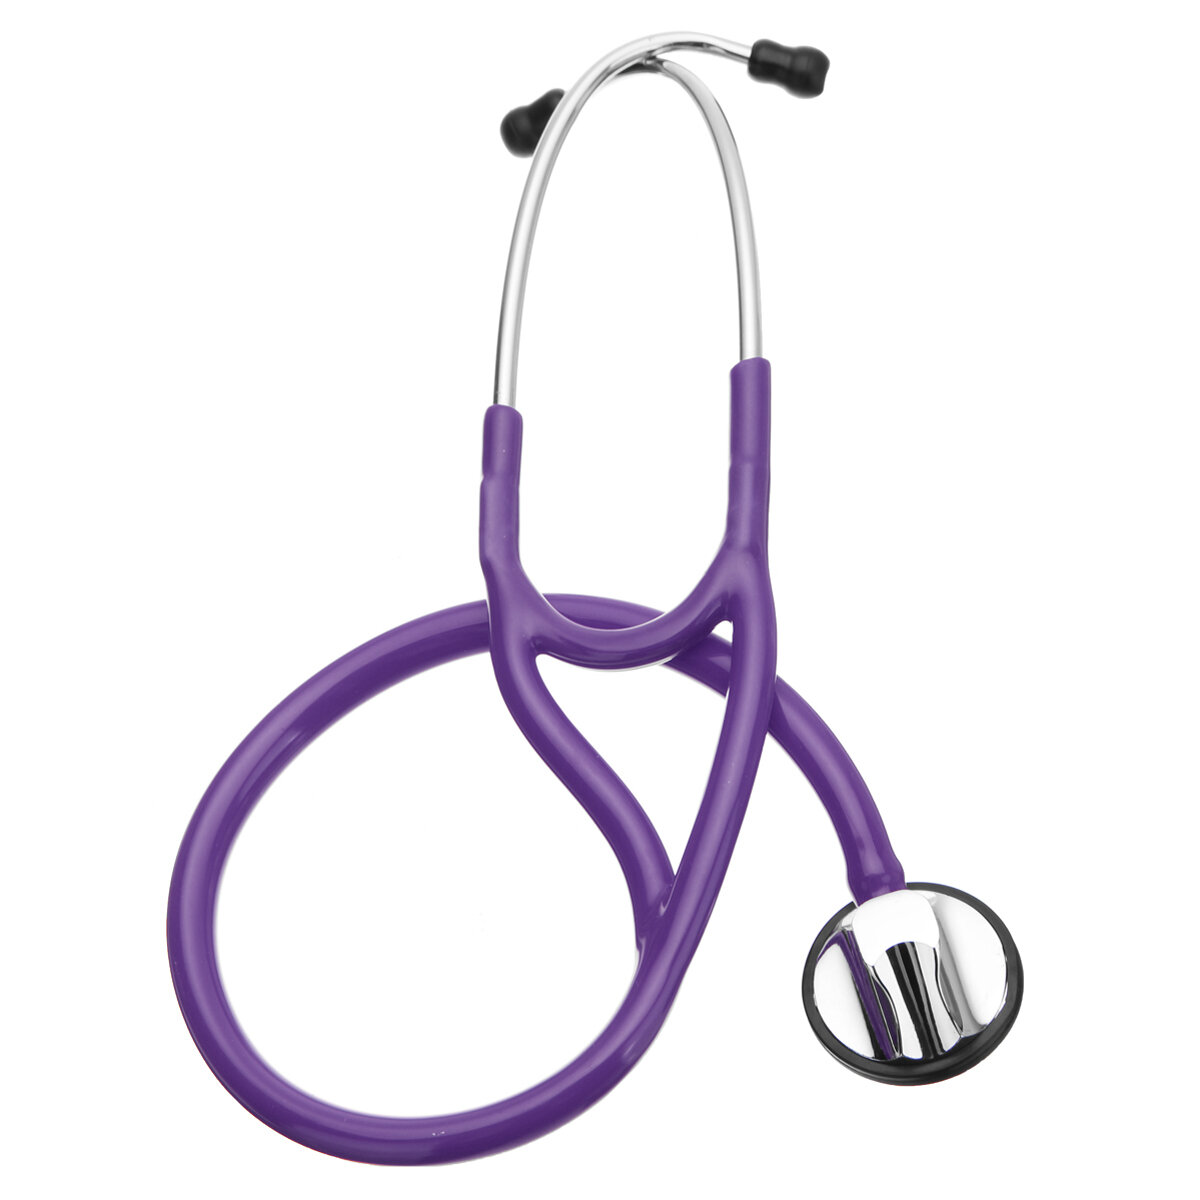 Professional Cardiology Stethoscope for Doctor Lab Hospital Supplies